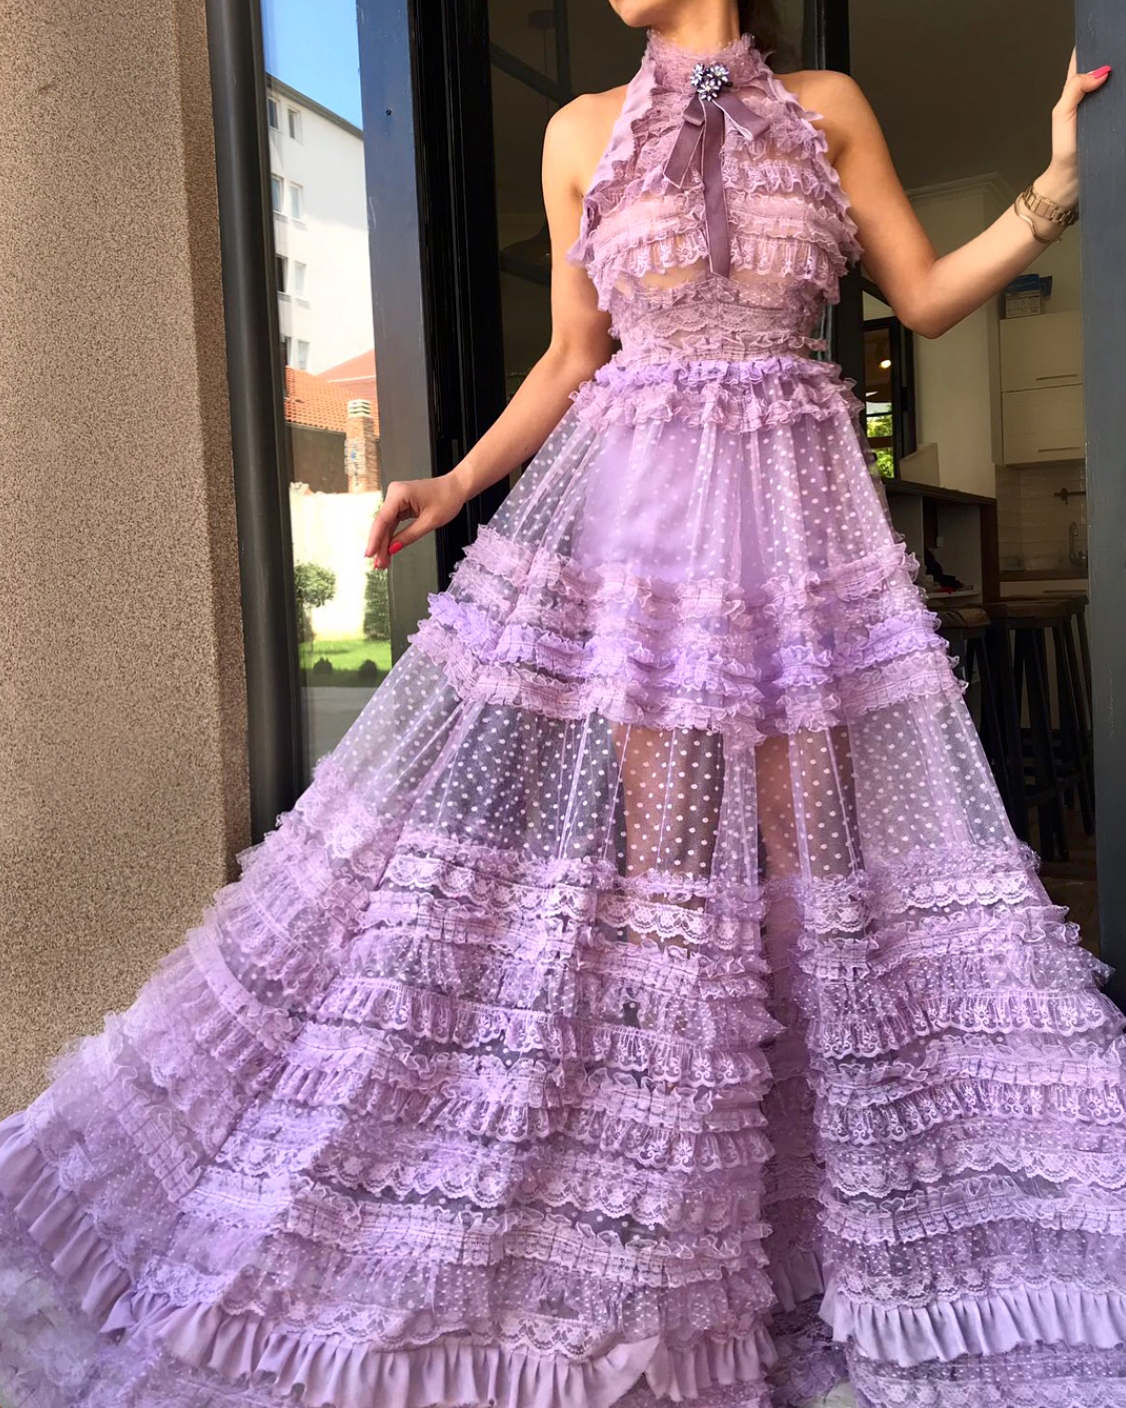 Purple A-Line dress with no sleeves and embroidery